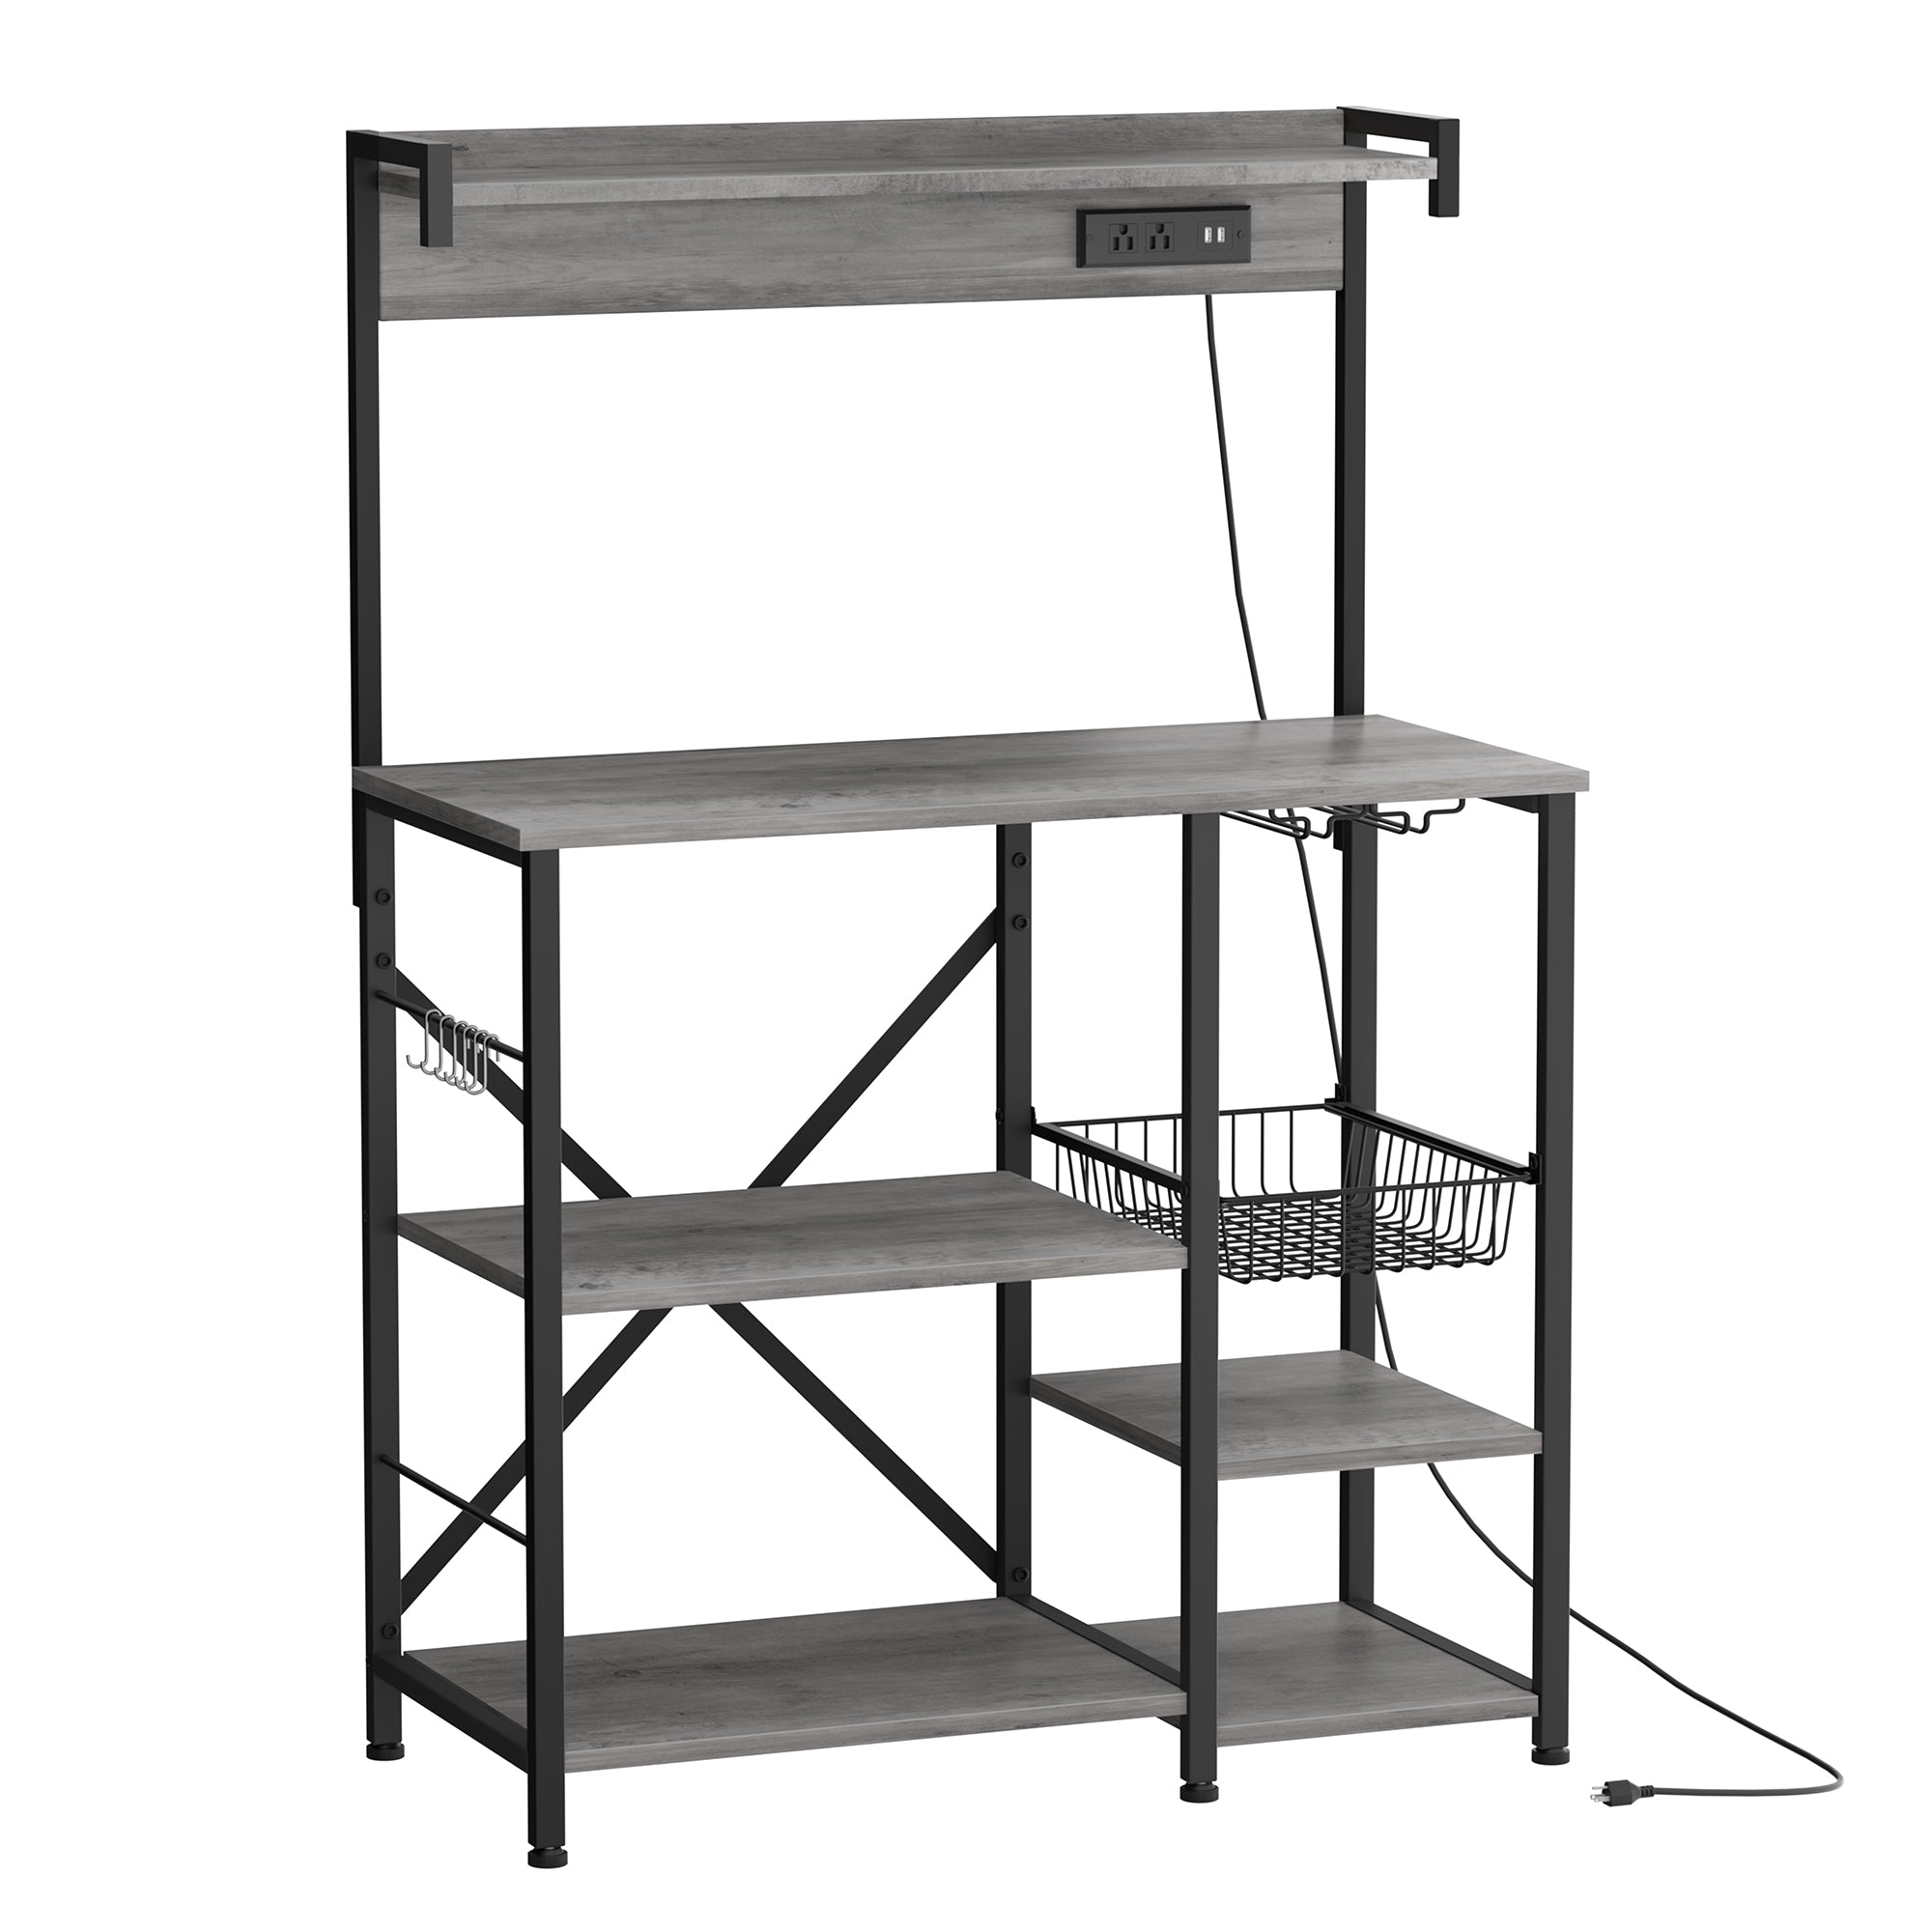 Walsunny Kitchen Bakers Rack with Power Outlet, Coffee Bar Table 4 Tie